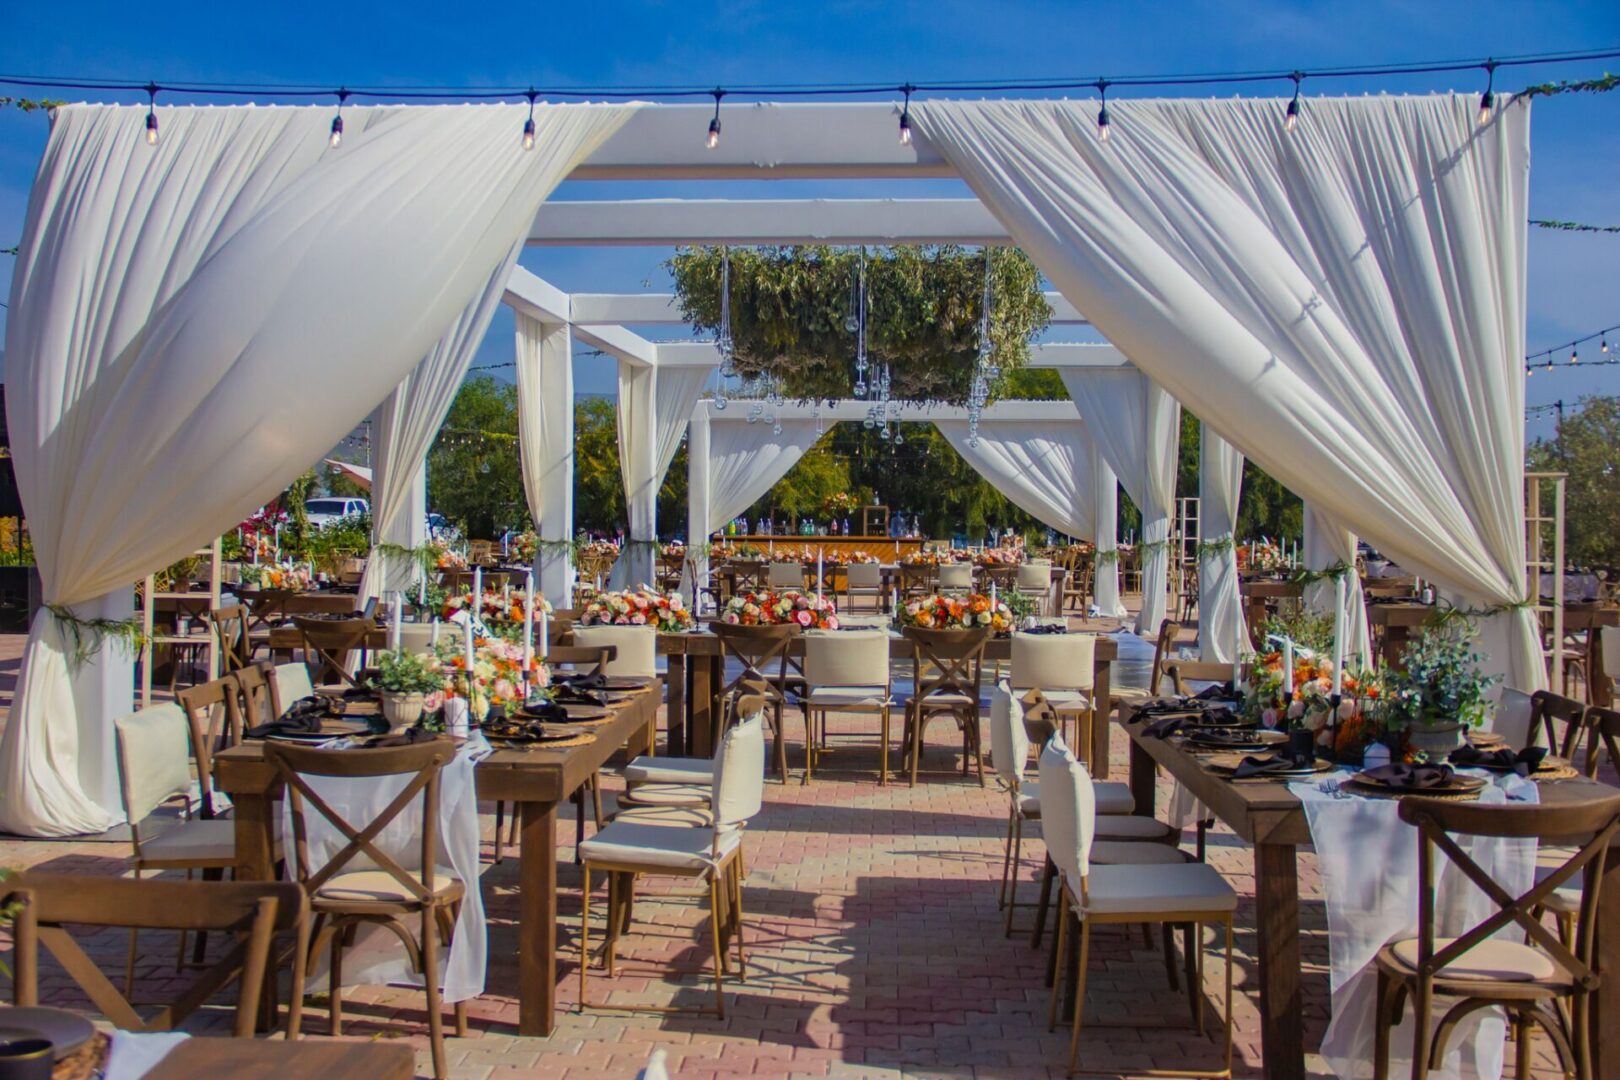 A large outdoor event with tables and chairs.